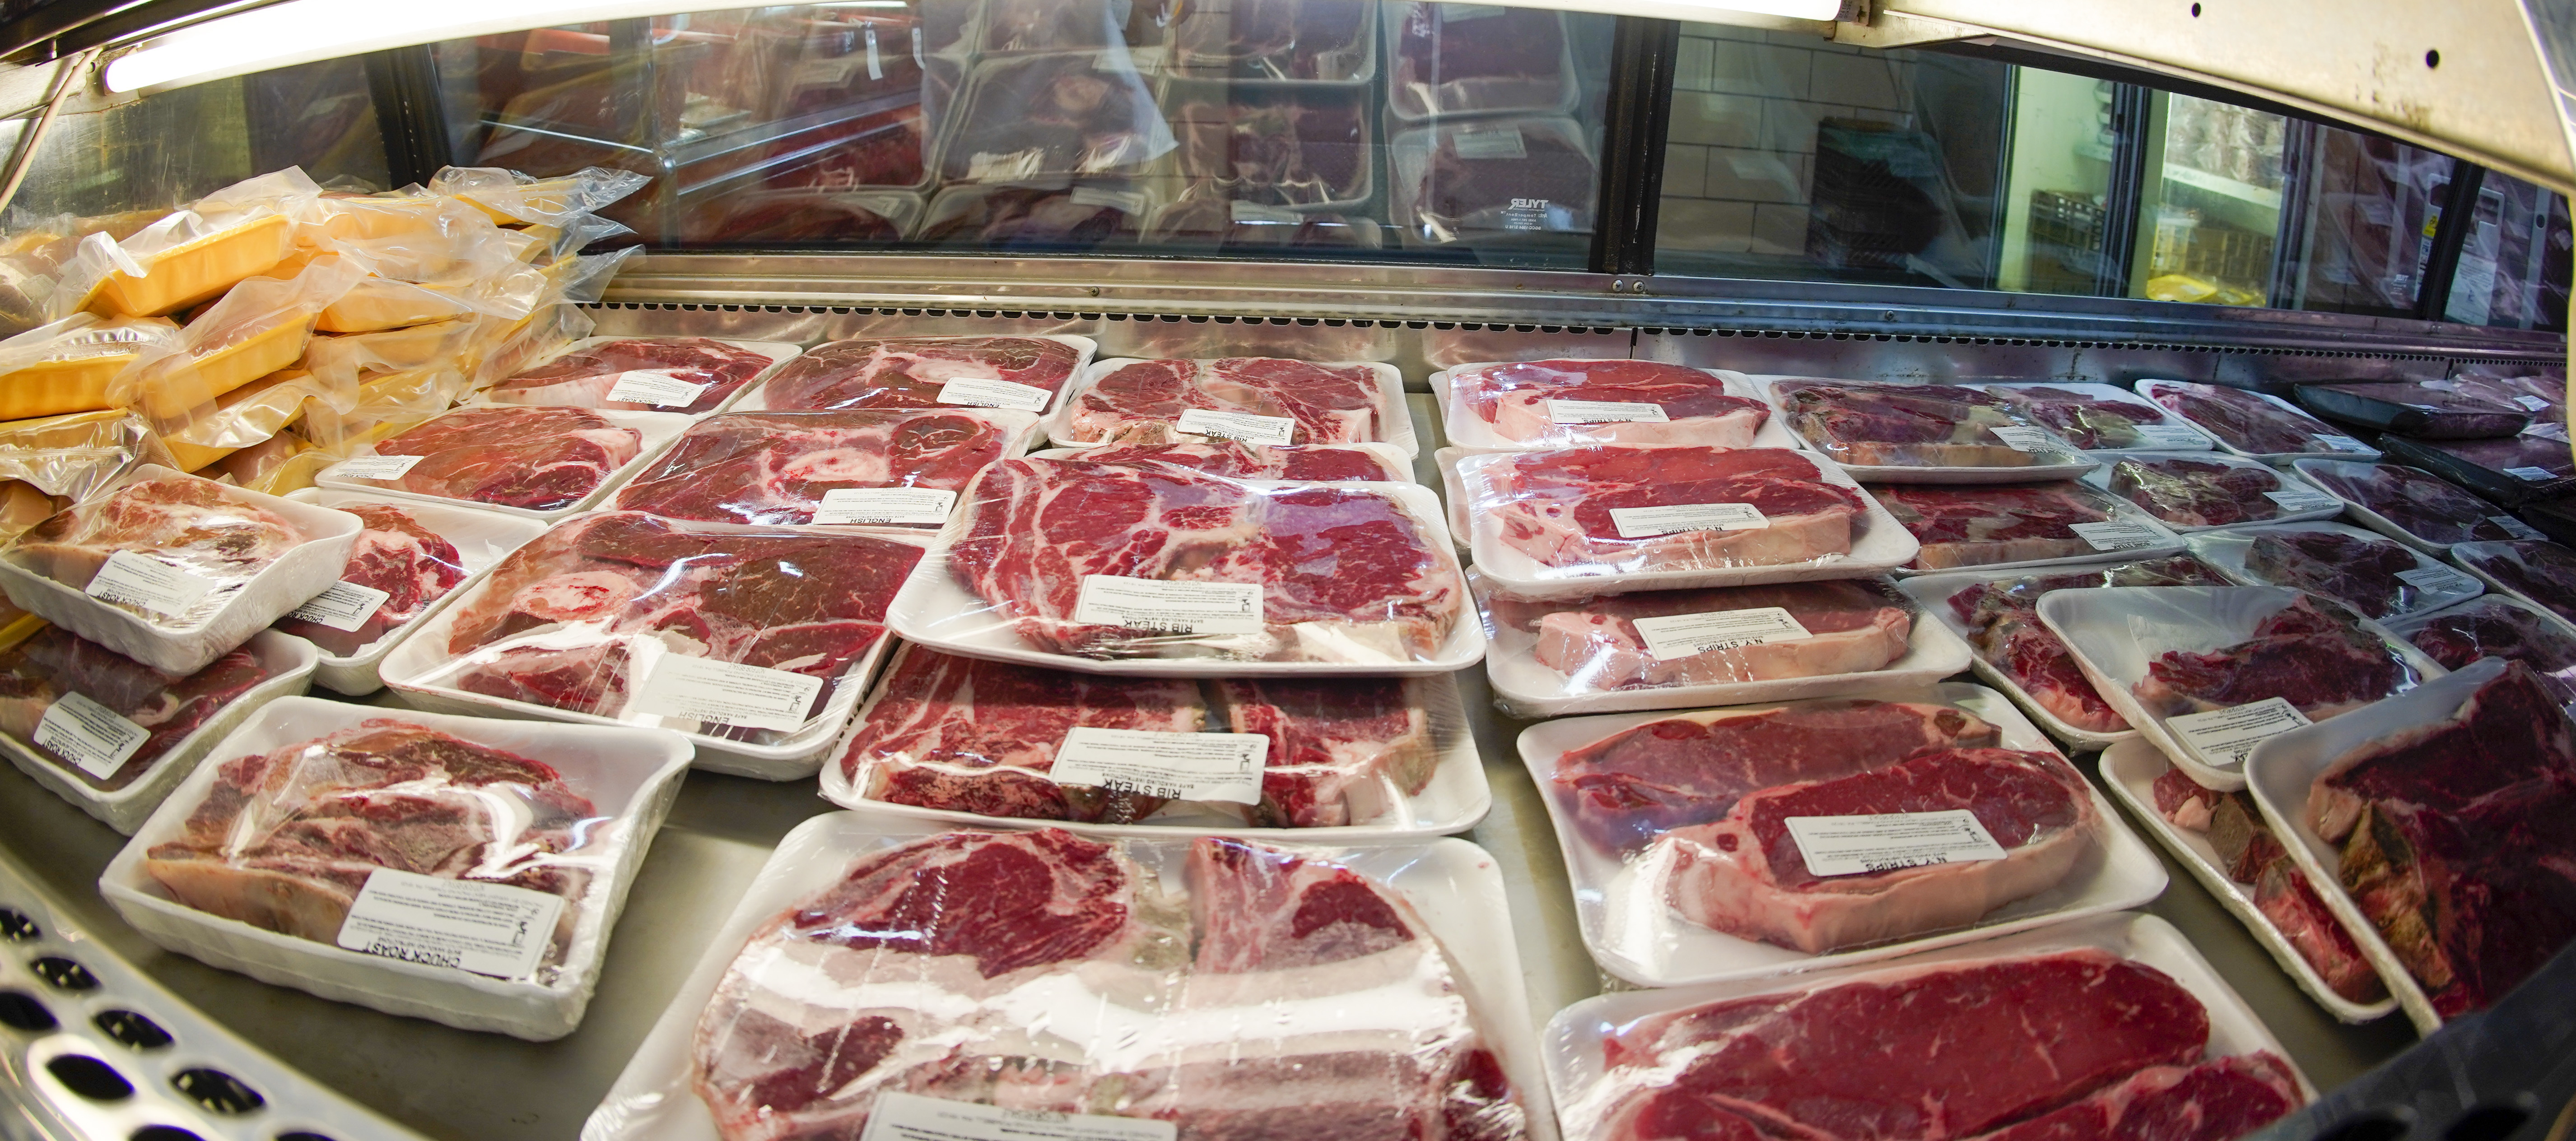 Winnipeg theft in spotlight after man arrested for stealing $10,000 worth of meat